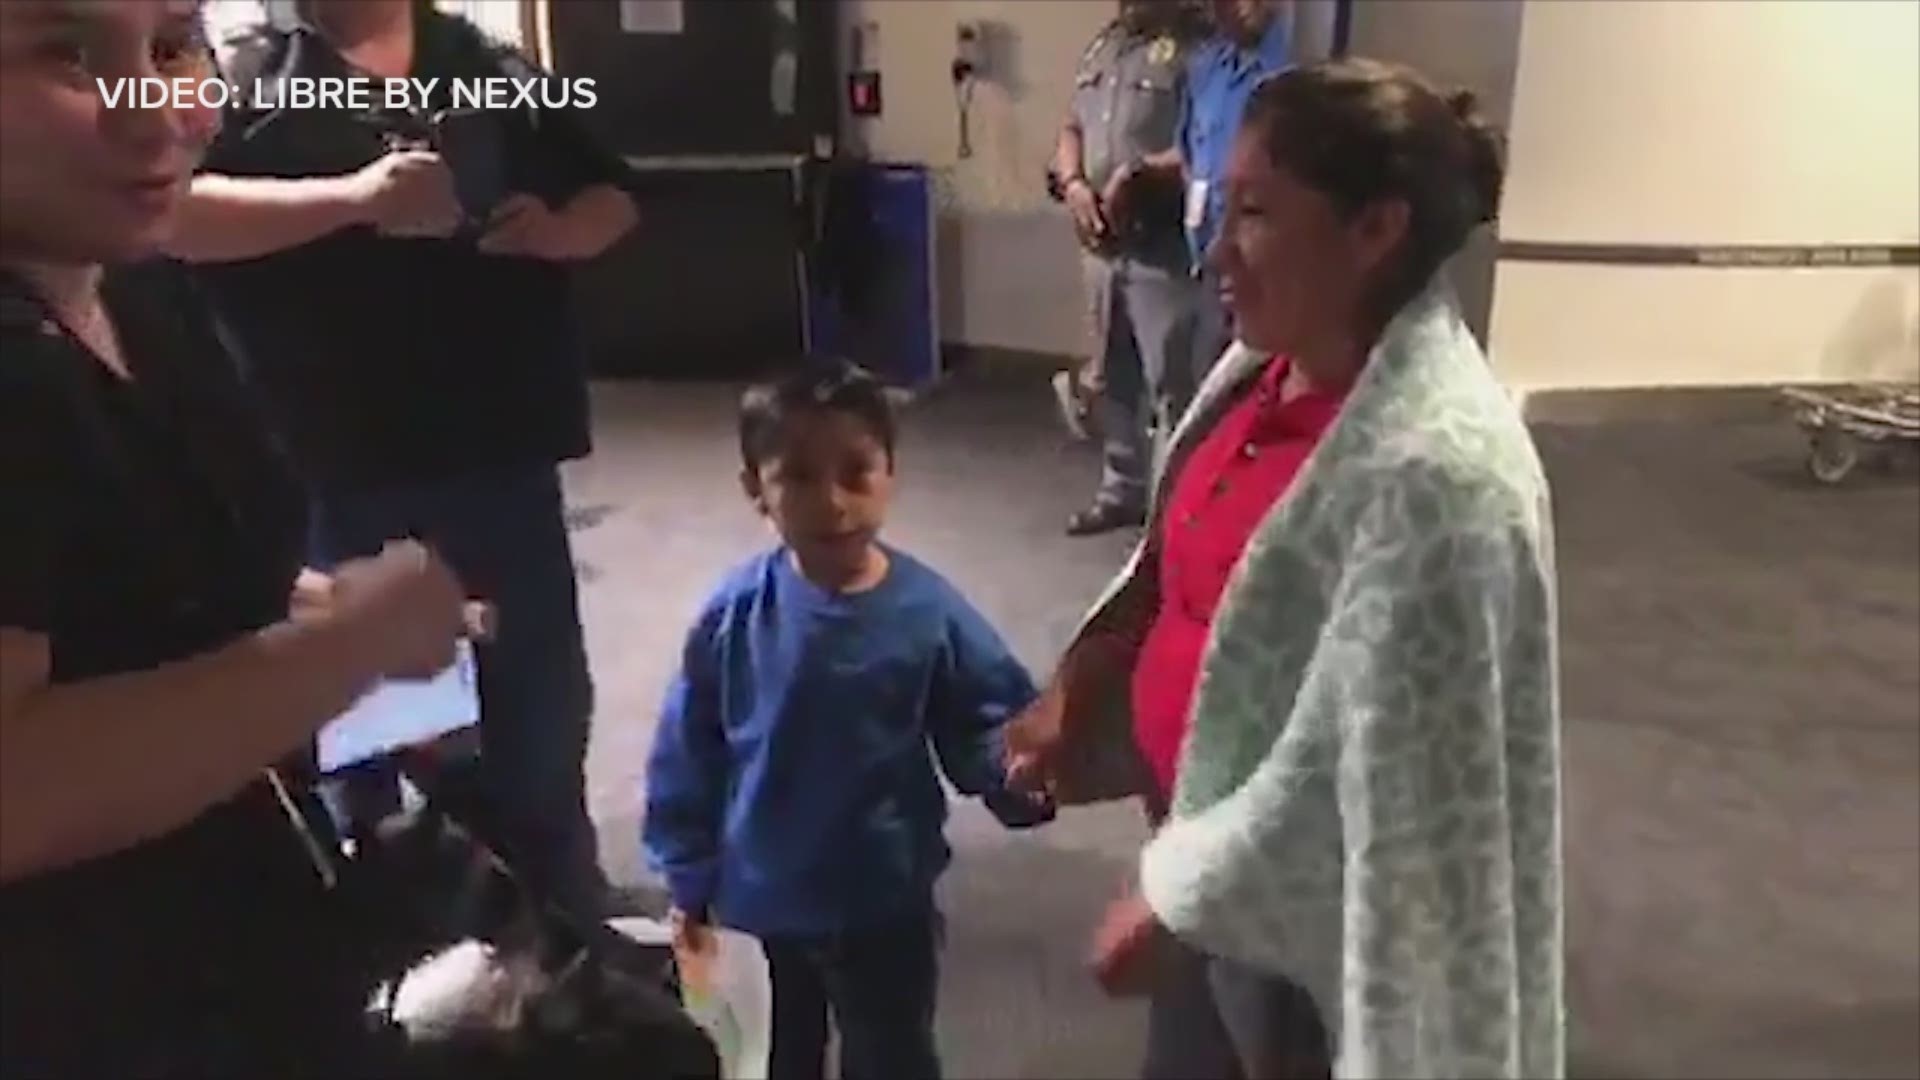 'Thank God you're with me, my love.' A Guatemalan mother was reunited with her son on Friday after they were separated while seeking asylum in the U.S. (Video: Libre by Nexus)